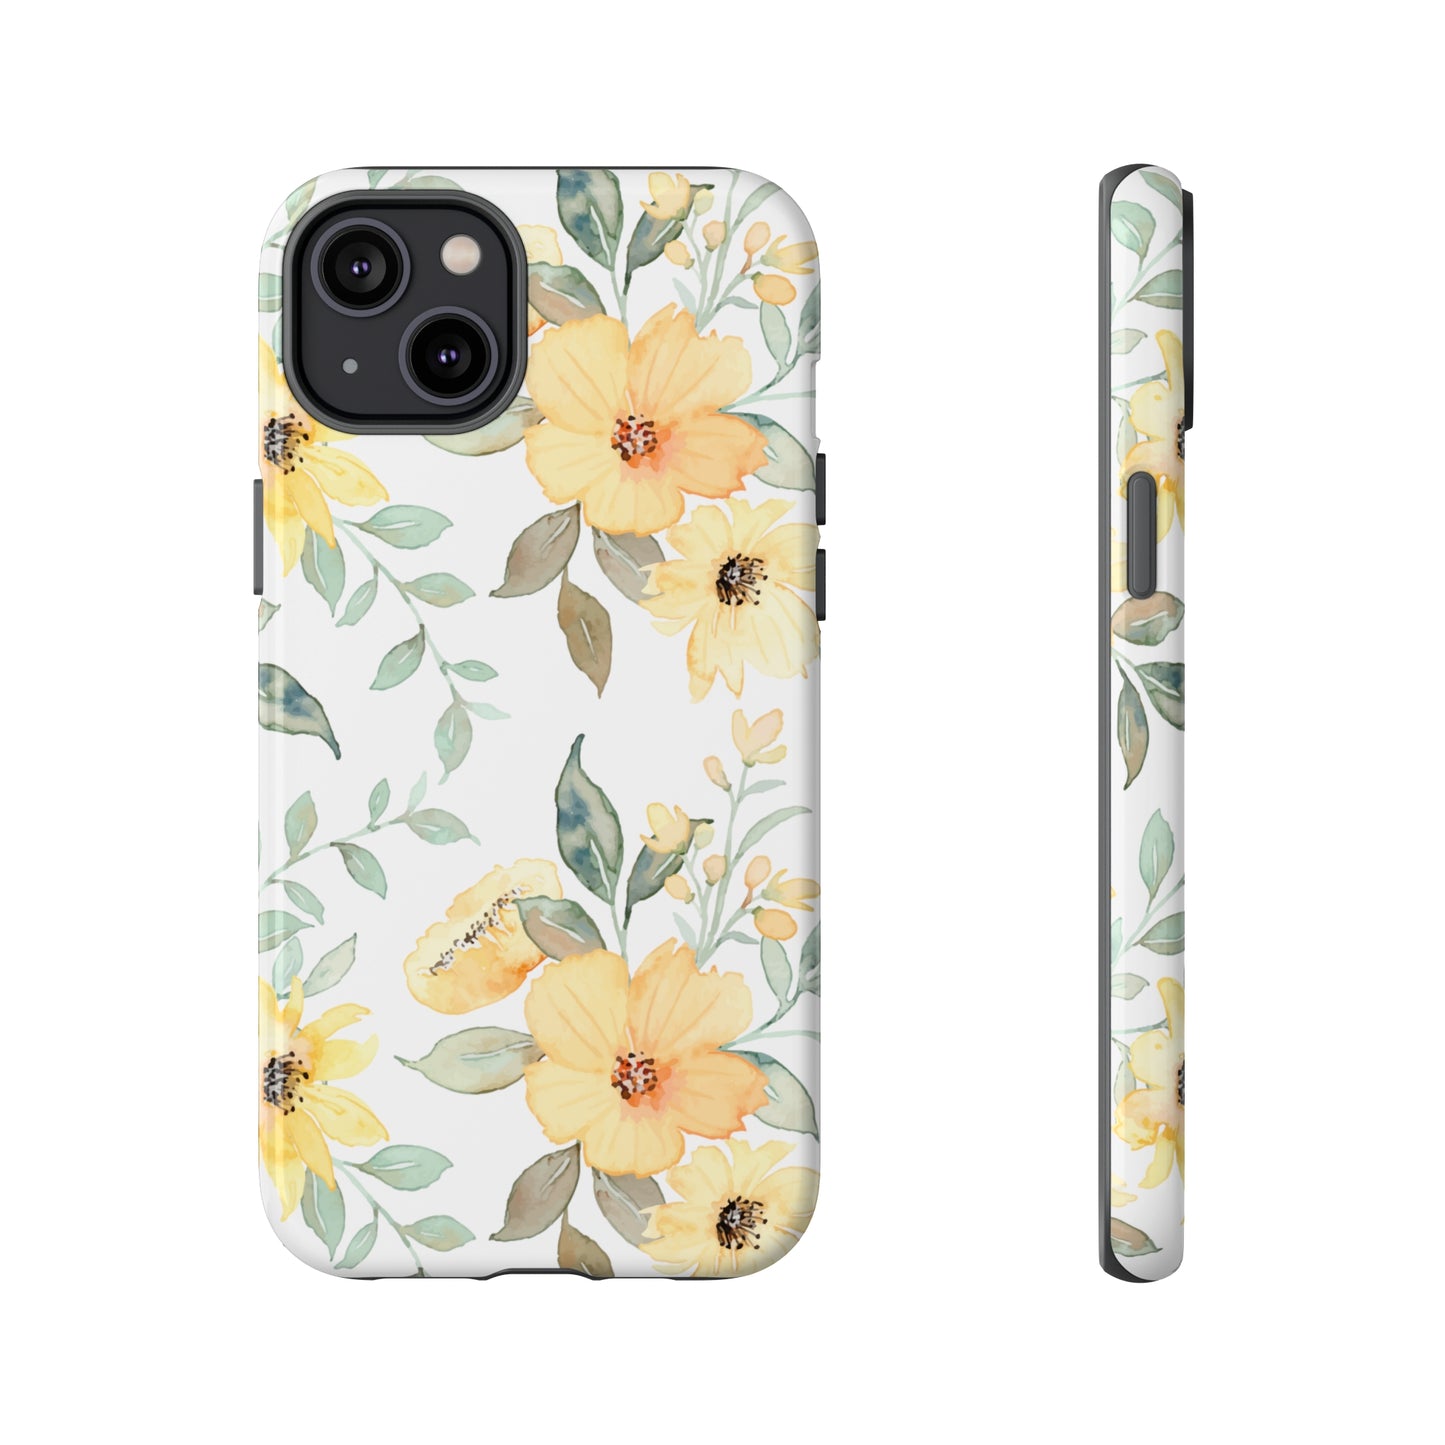 Floral Phone case fits iPhone Samsung Galaxy Google Pixel - Yellow